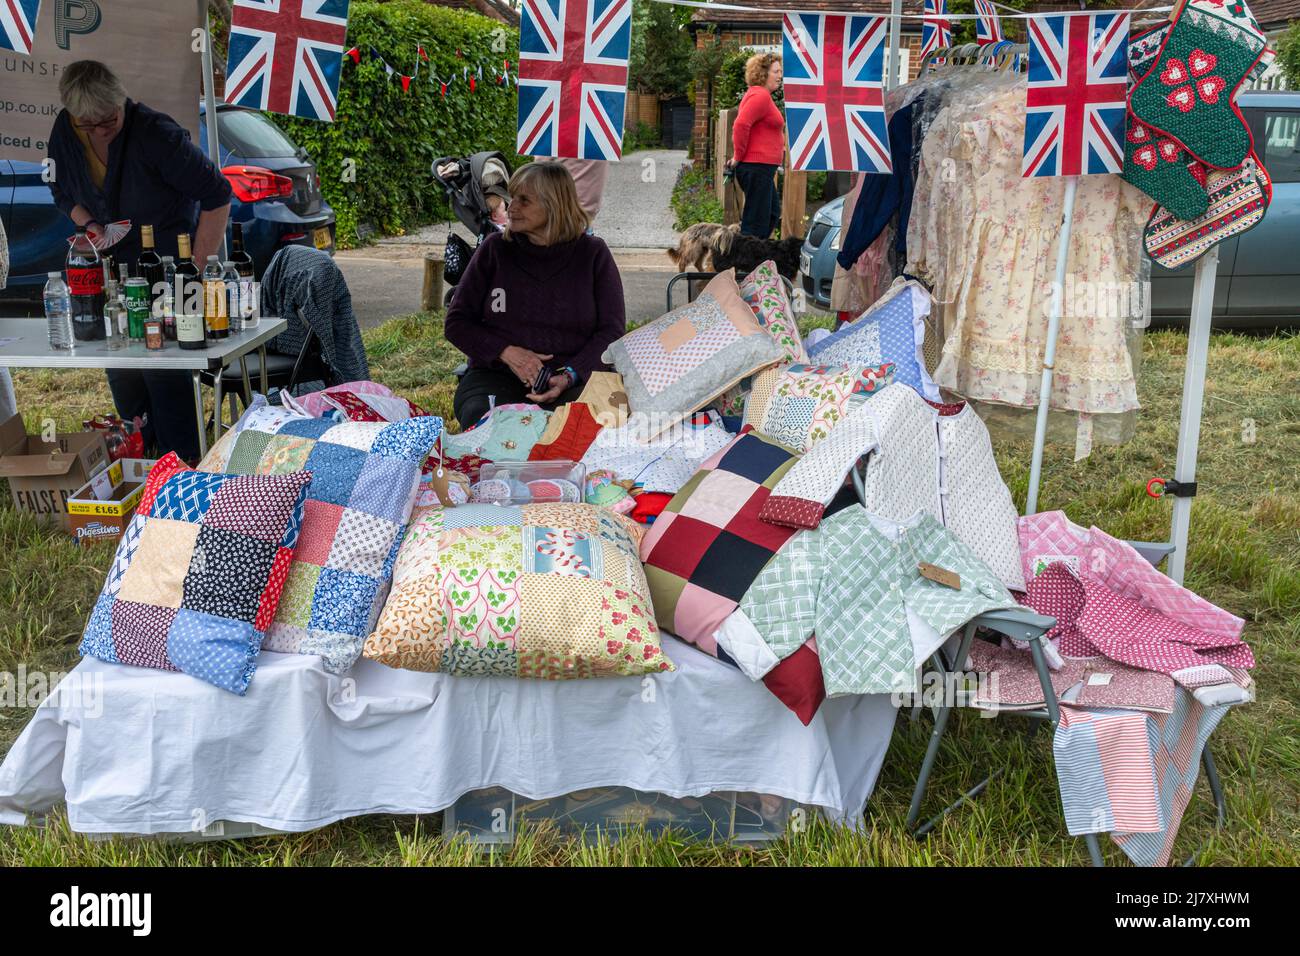 Dunsfold village fete, Surrey, England, UK. Stalls with handicrafts and bottles Stock Photo